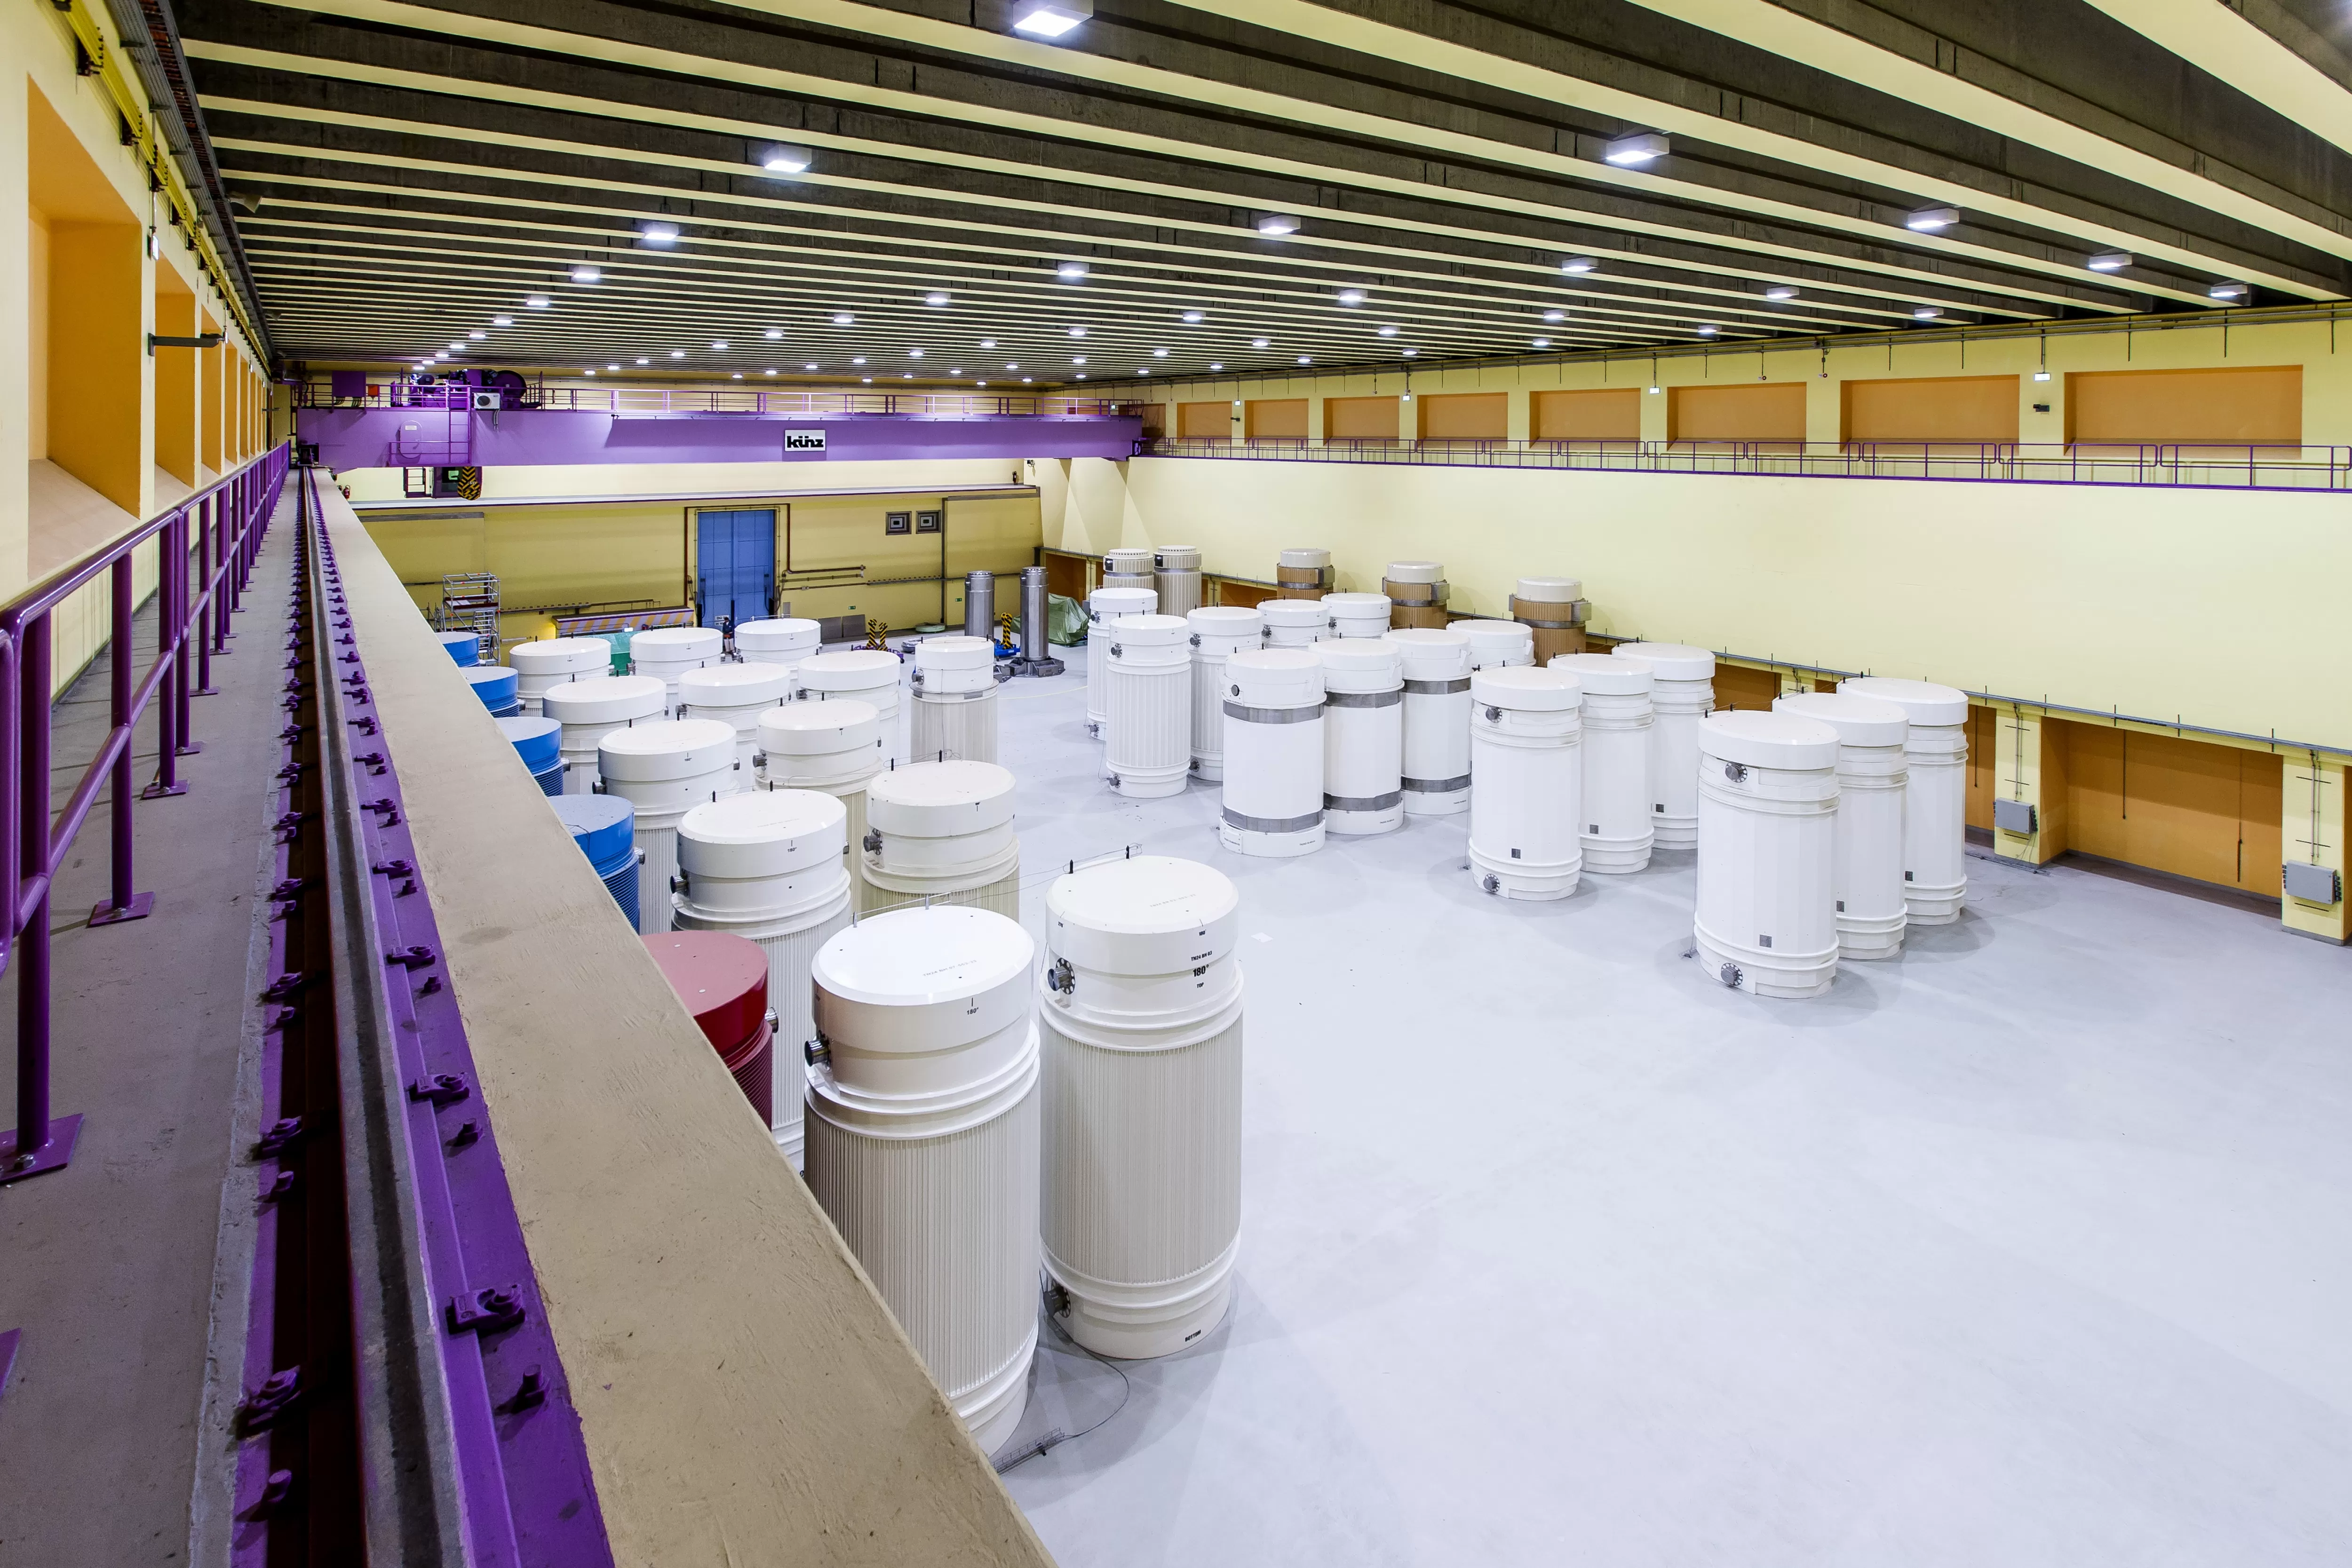 Until its disposal in a deep geological repository, high-level waste is stored in special transport and storage casks (also known as “Castor” containers). Photo: ZWILAG